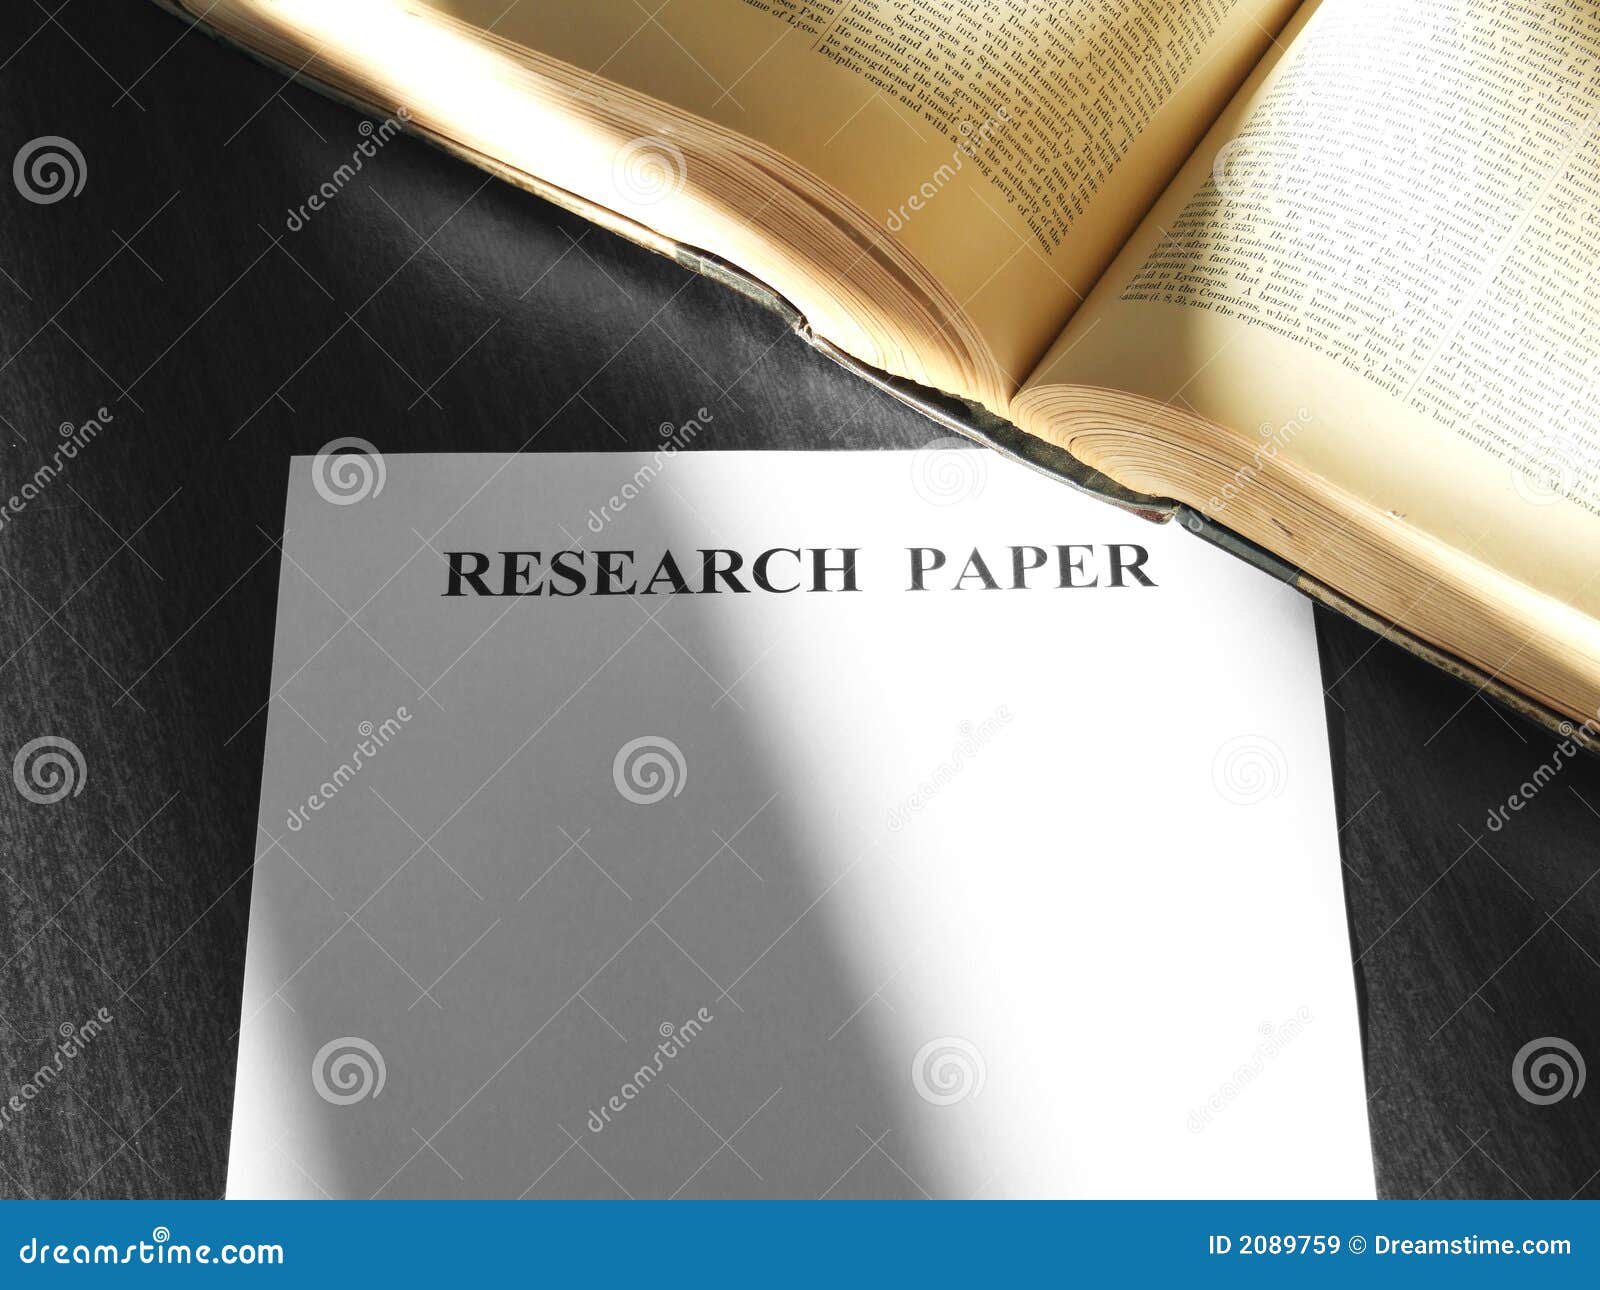 Research paper copyright